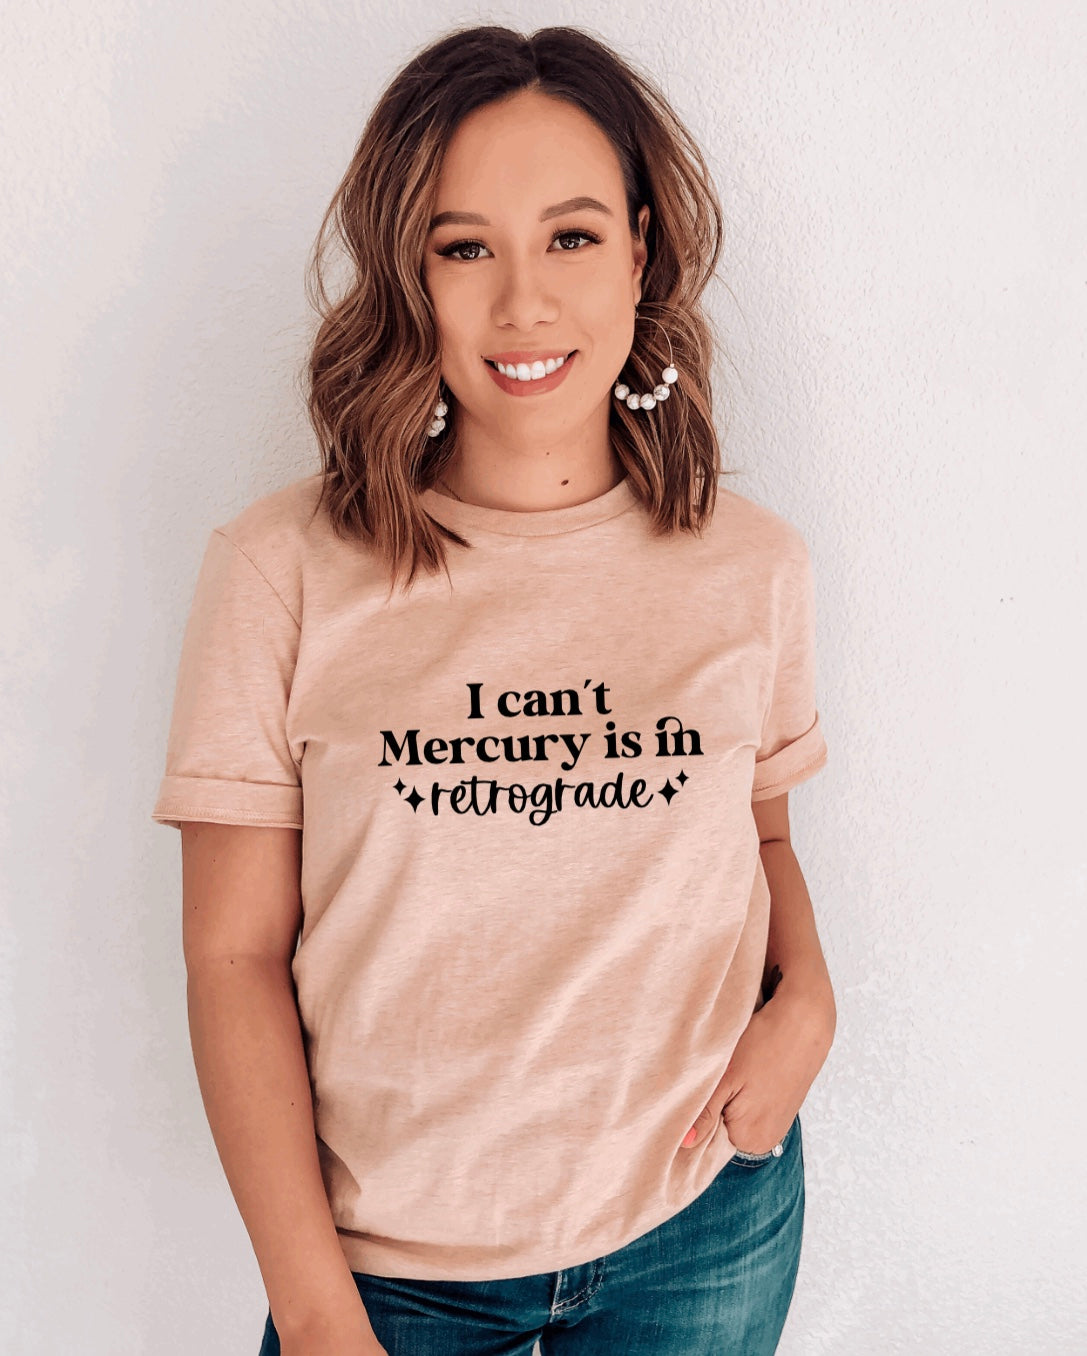 I can’t Mercury is in Retrograde t-shirt